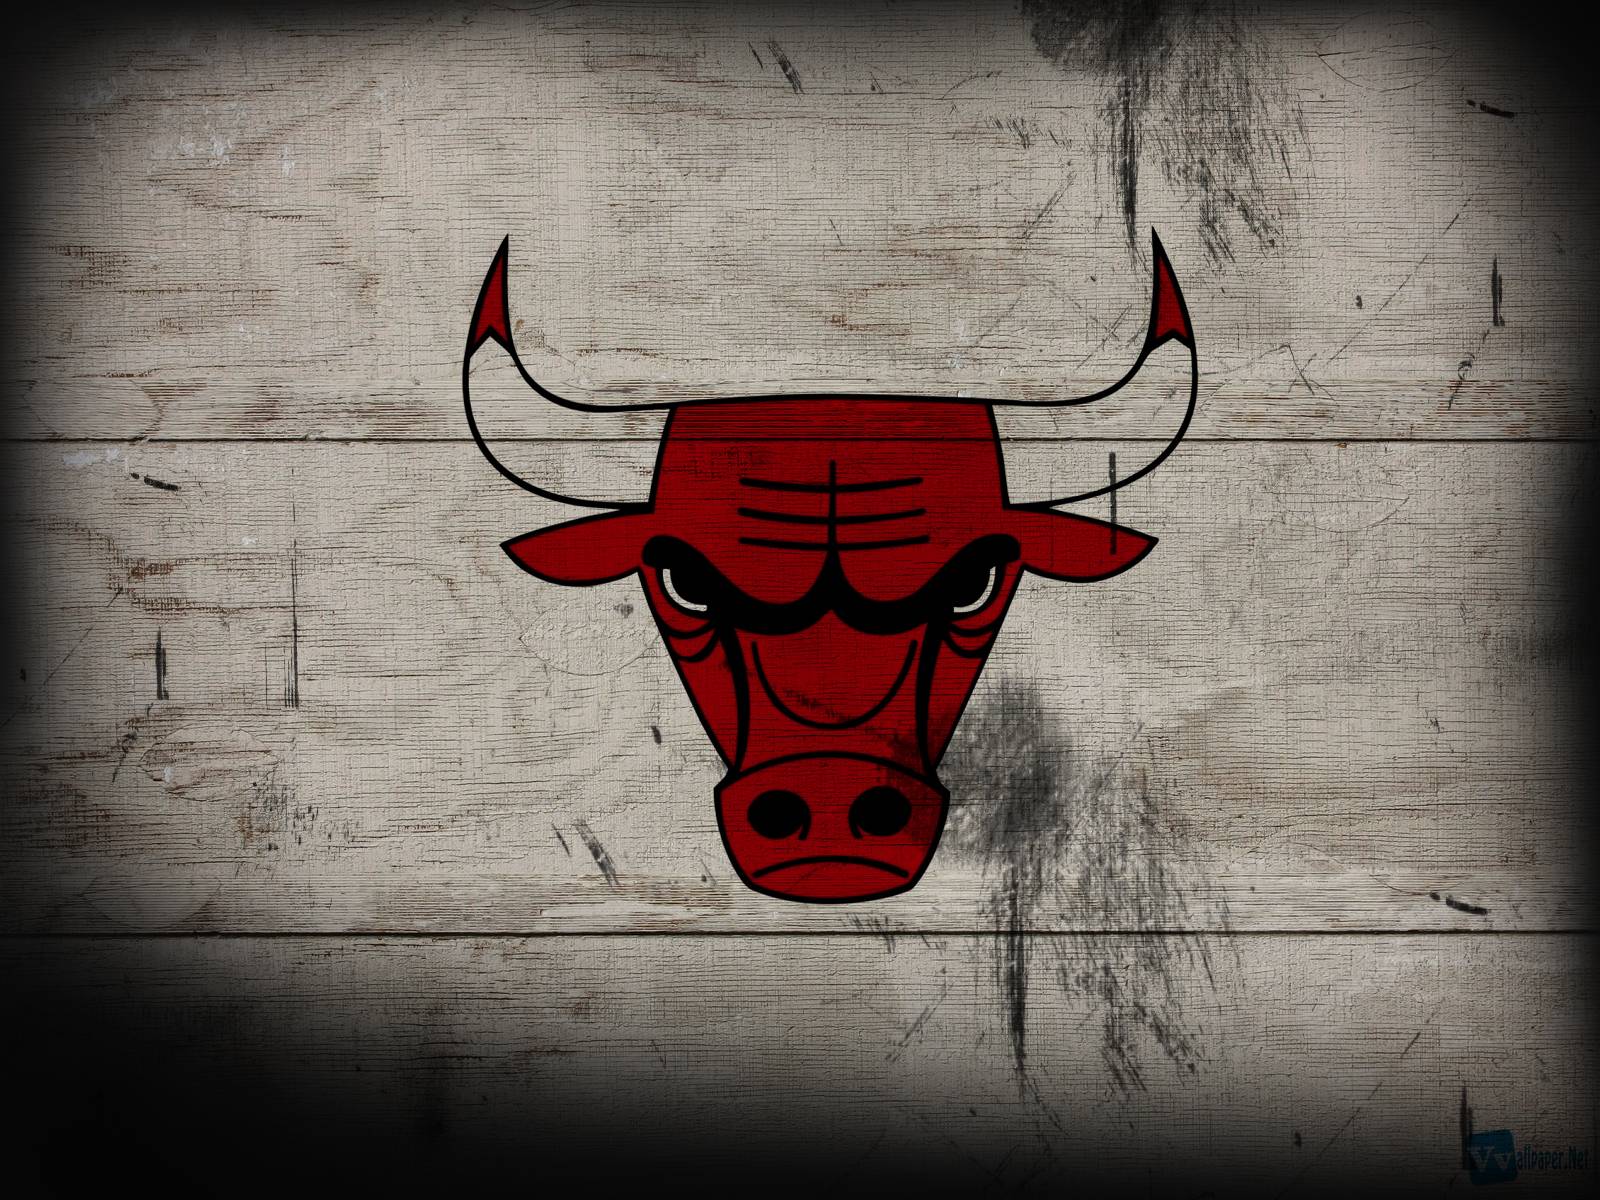 Remarkable Chicago Bulls Wallpaper Windy City 1600x1200PX